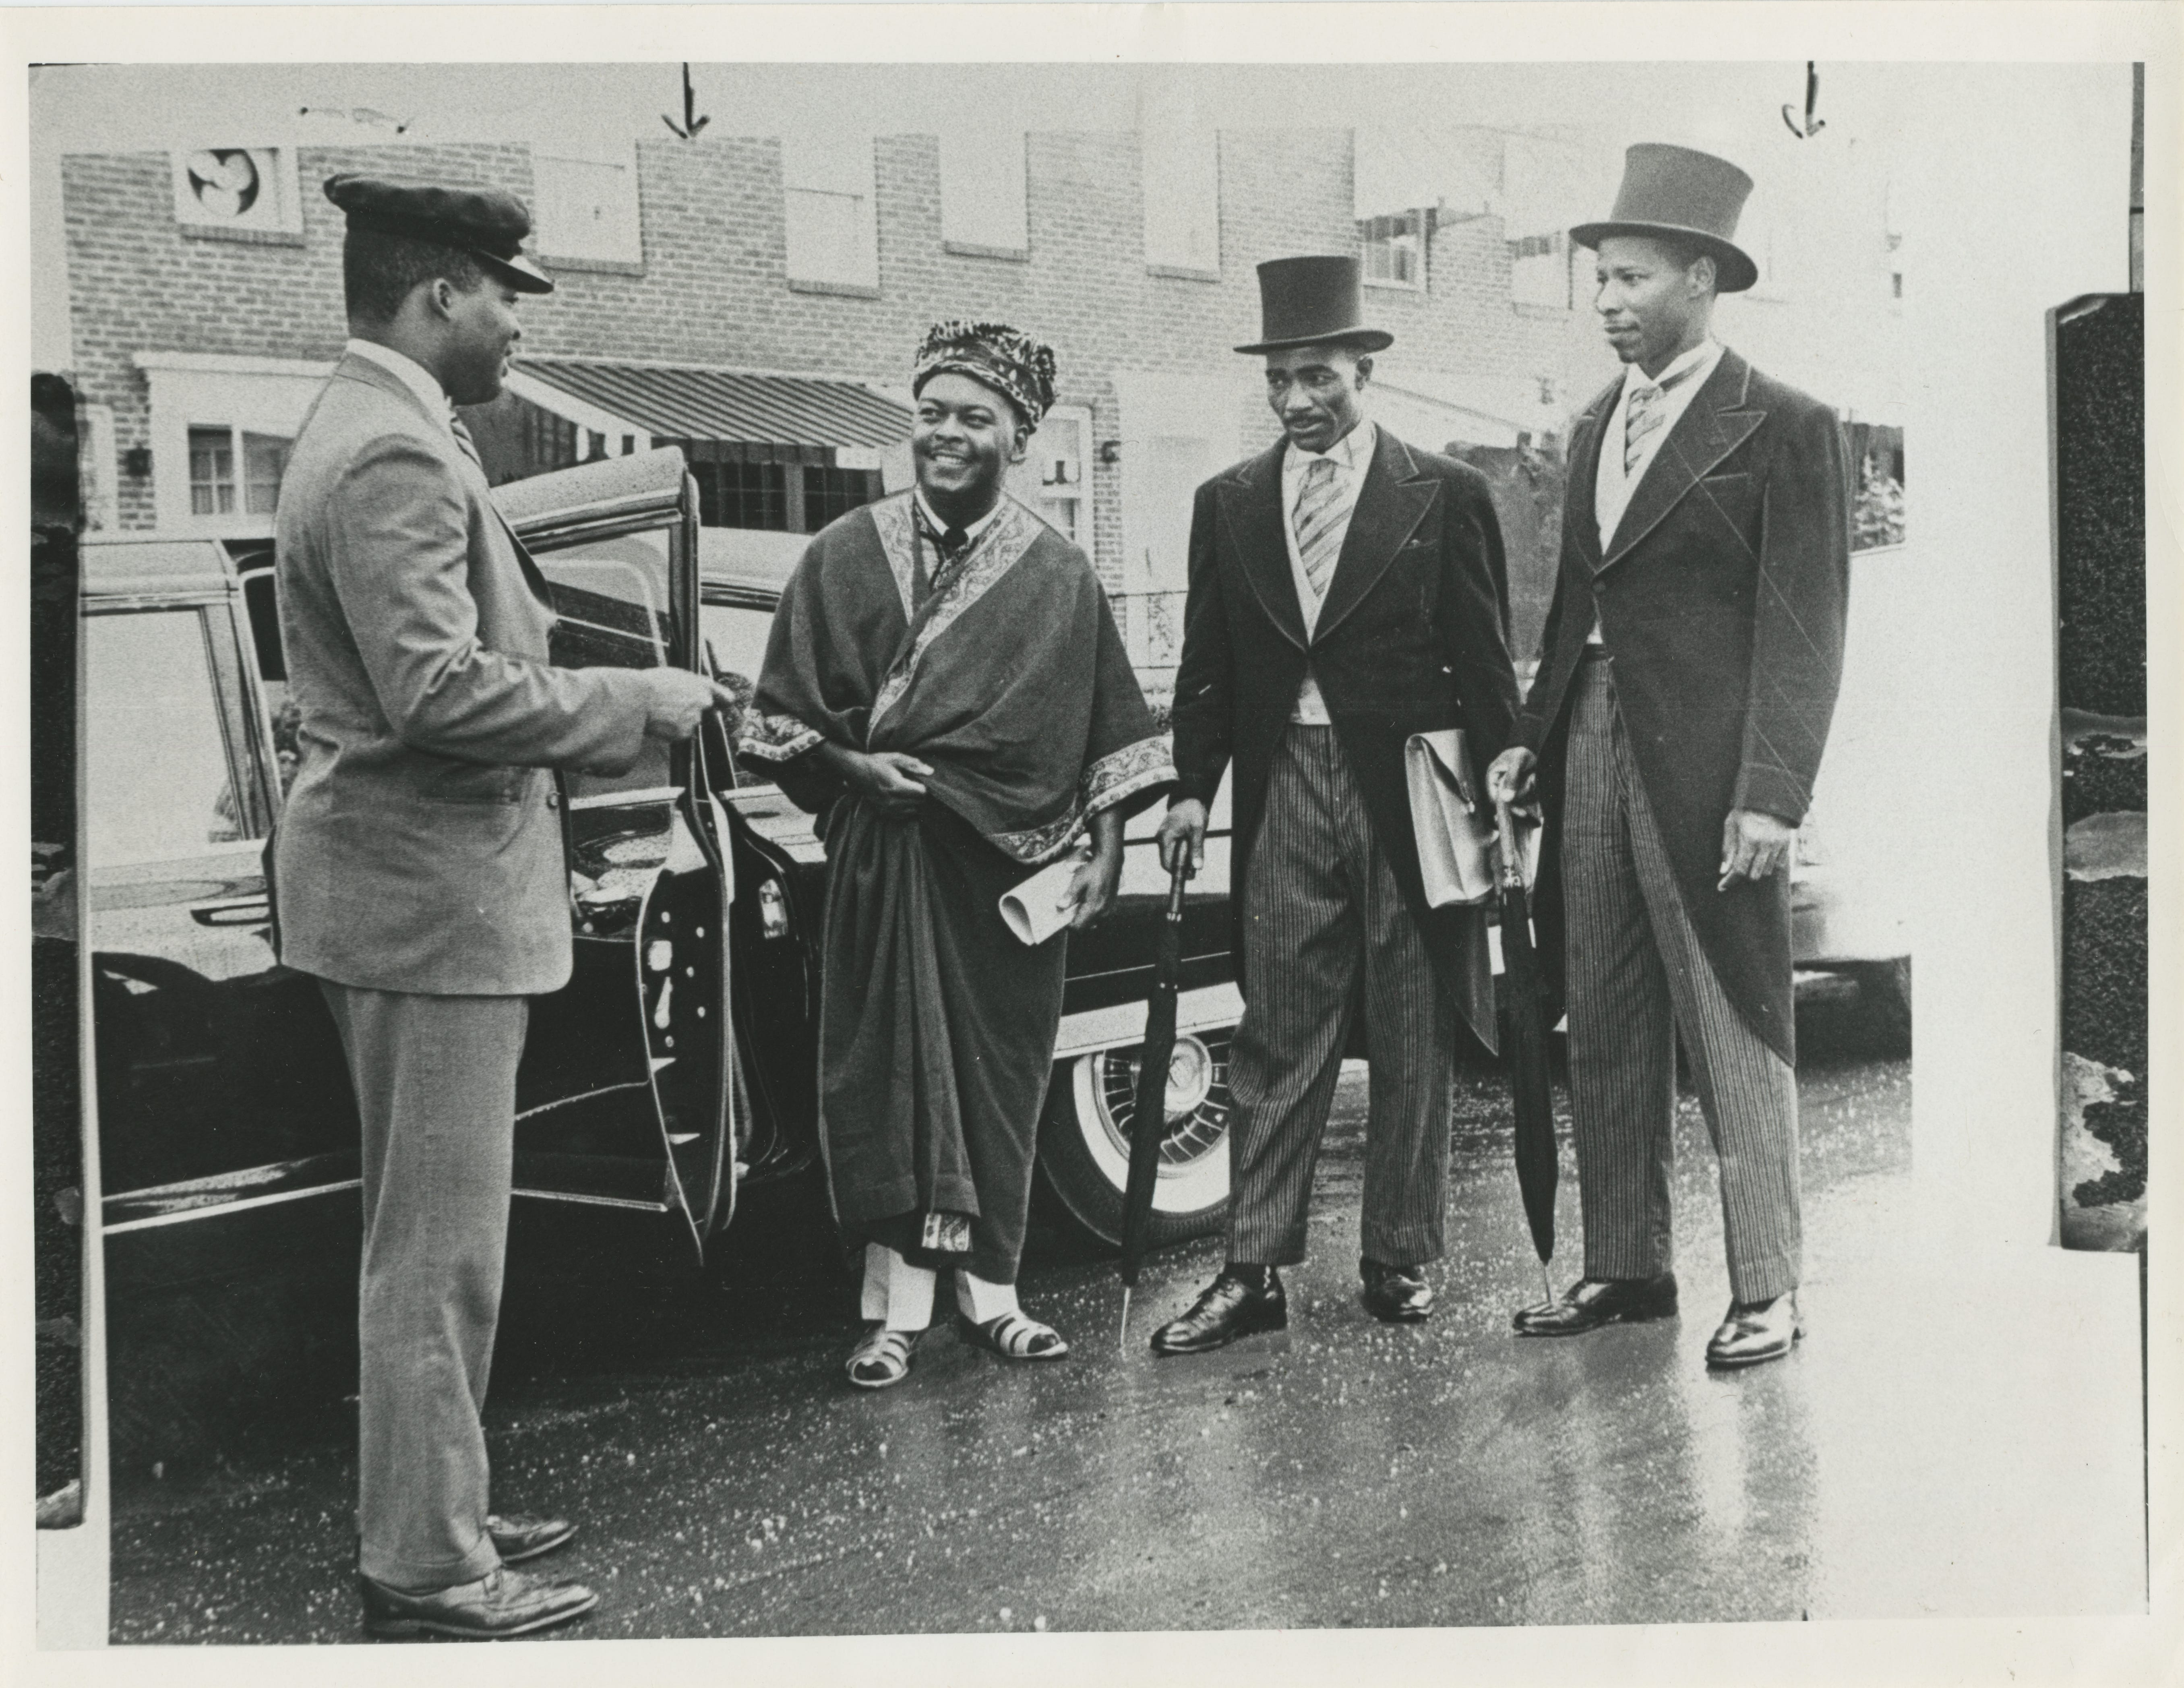 Dressed as African diplomats, reporters Herbert Magrum, from left, George Collins and Rufus Wells prepare to head out on assignment in their chauffeured limousine in August 1961. Writers for an Afro newspaper, they were testing whether owners of segregated restaurants along Maryland's Route 40 corridor would serve "African diplomats."